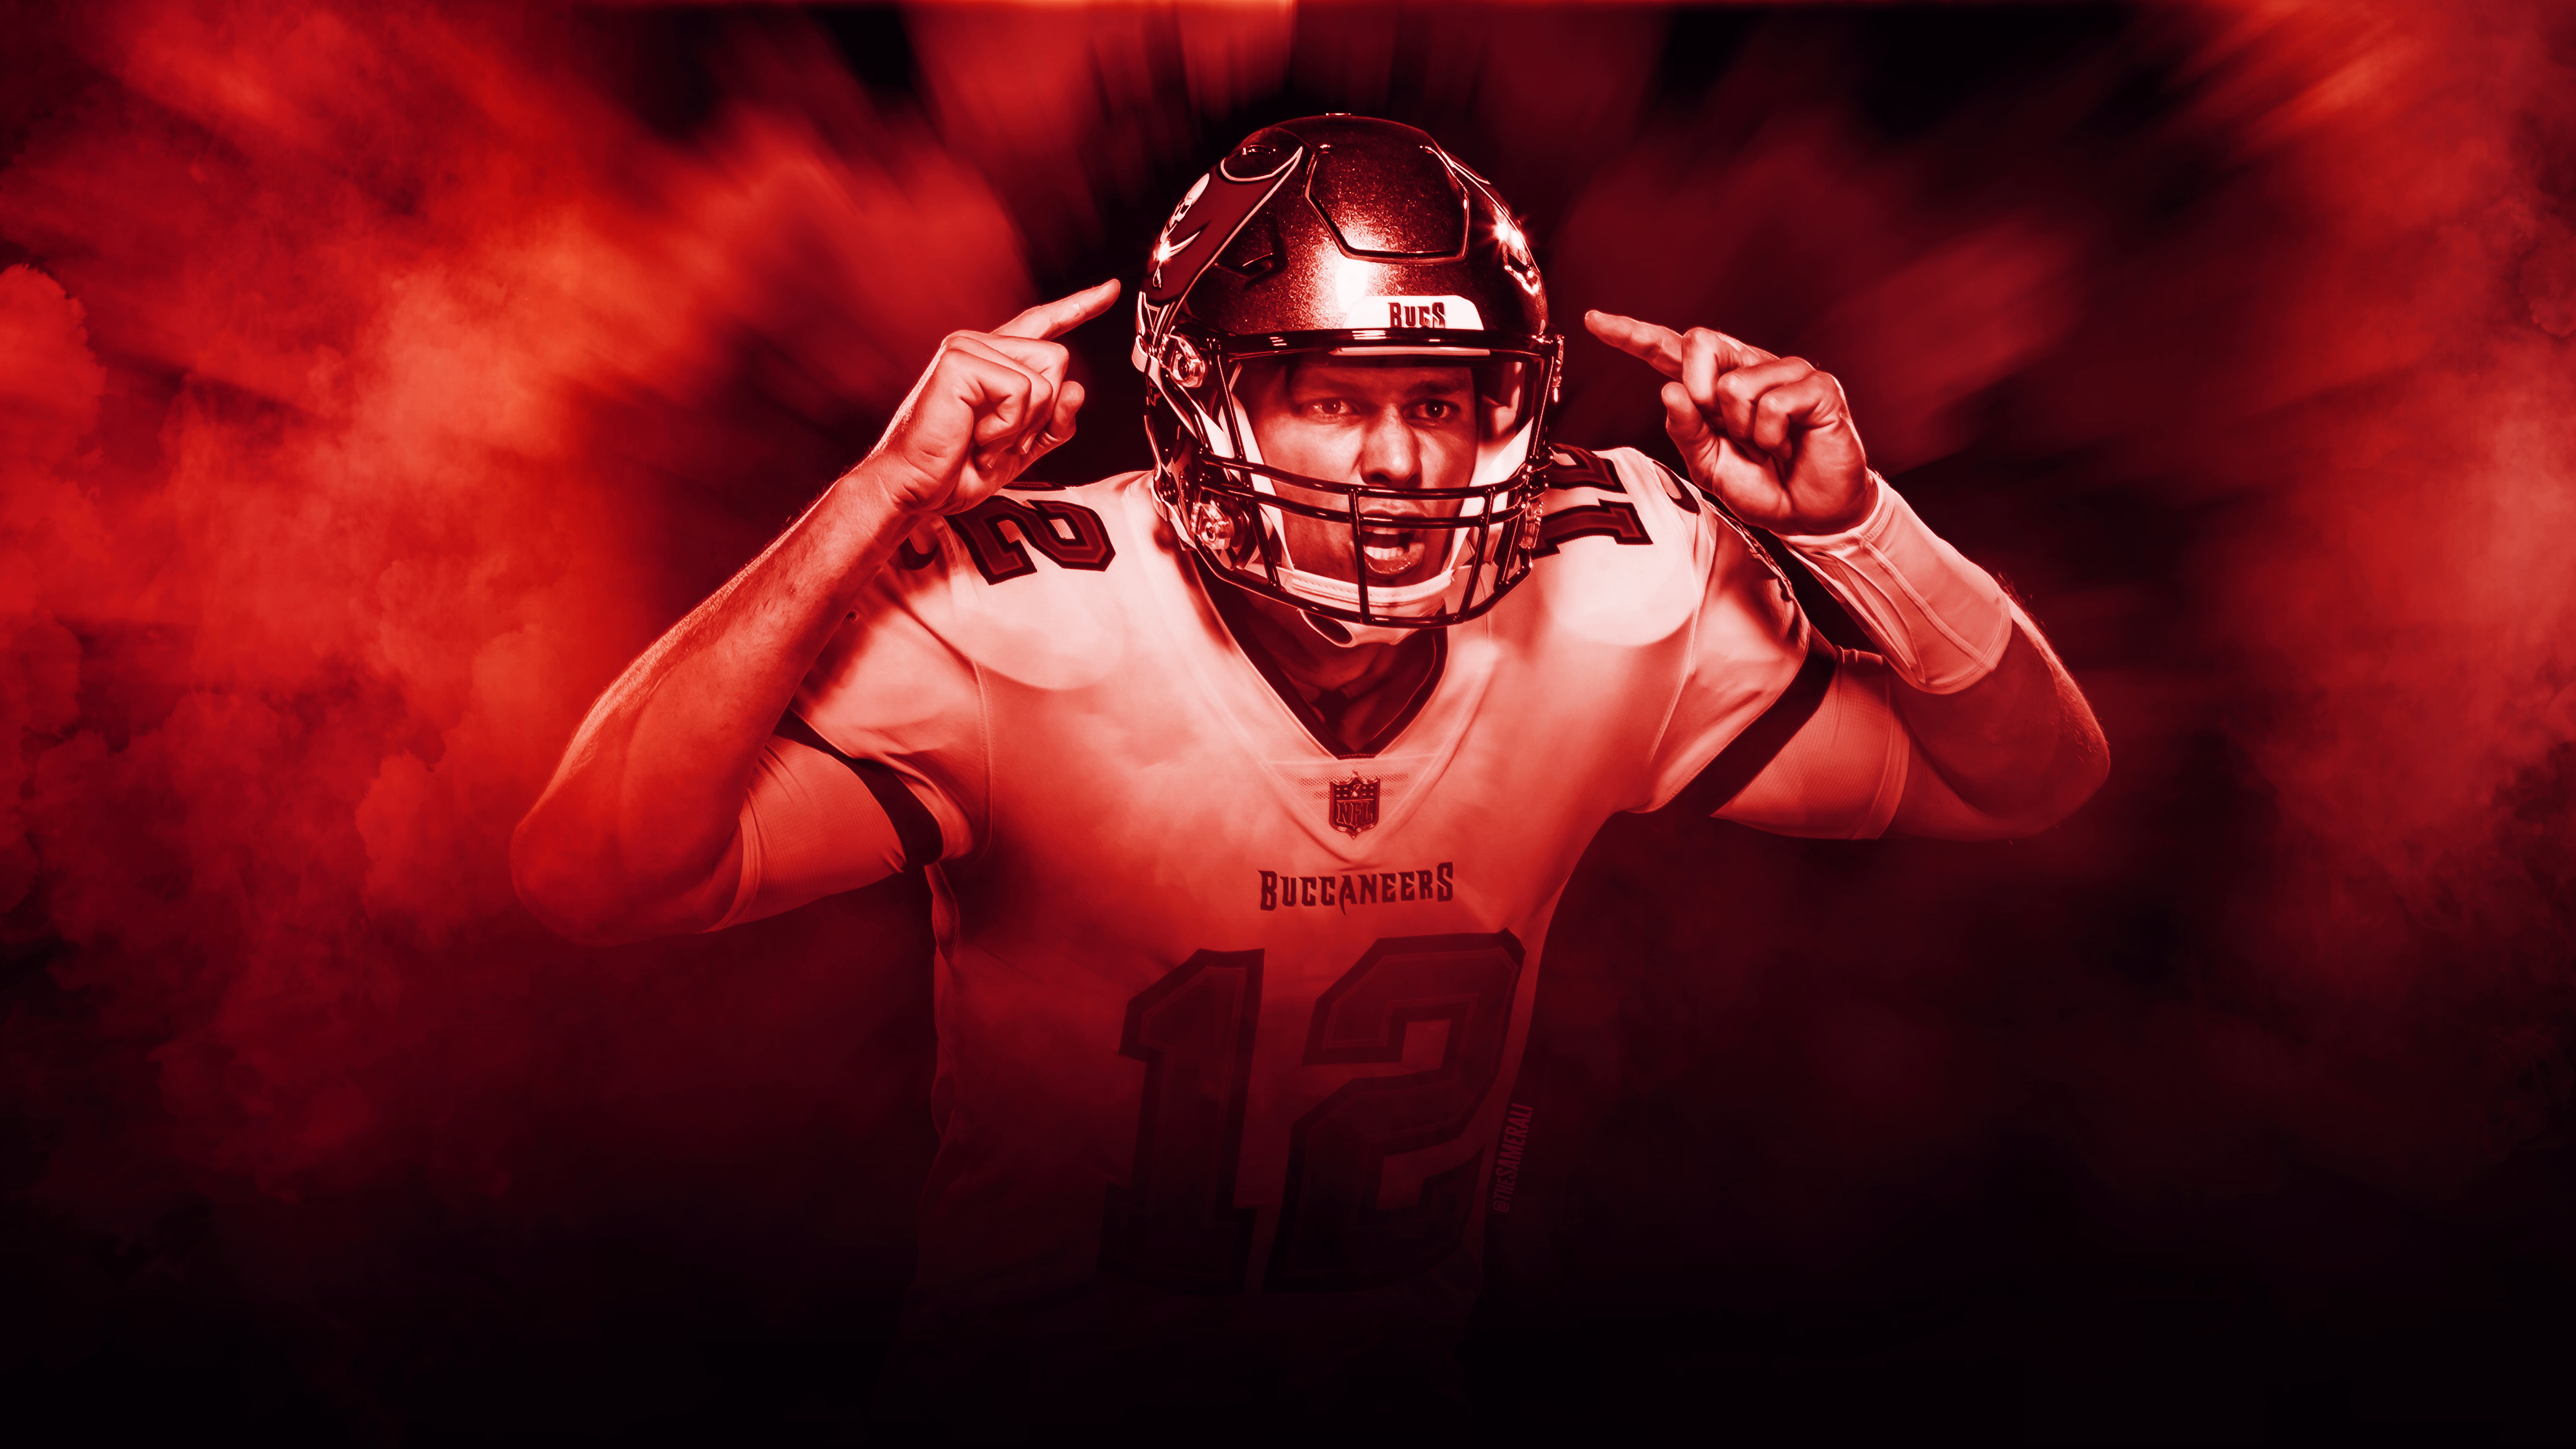 Share 61+ tom brady buccaneers wallpaper latest - in.cdgdbentre